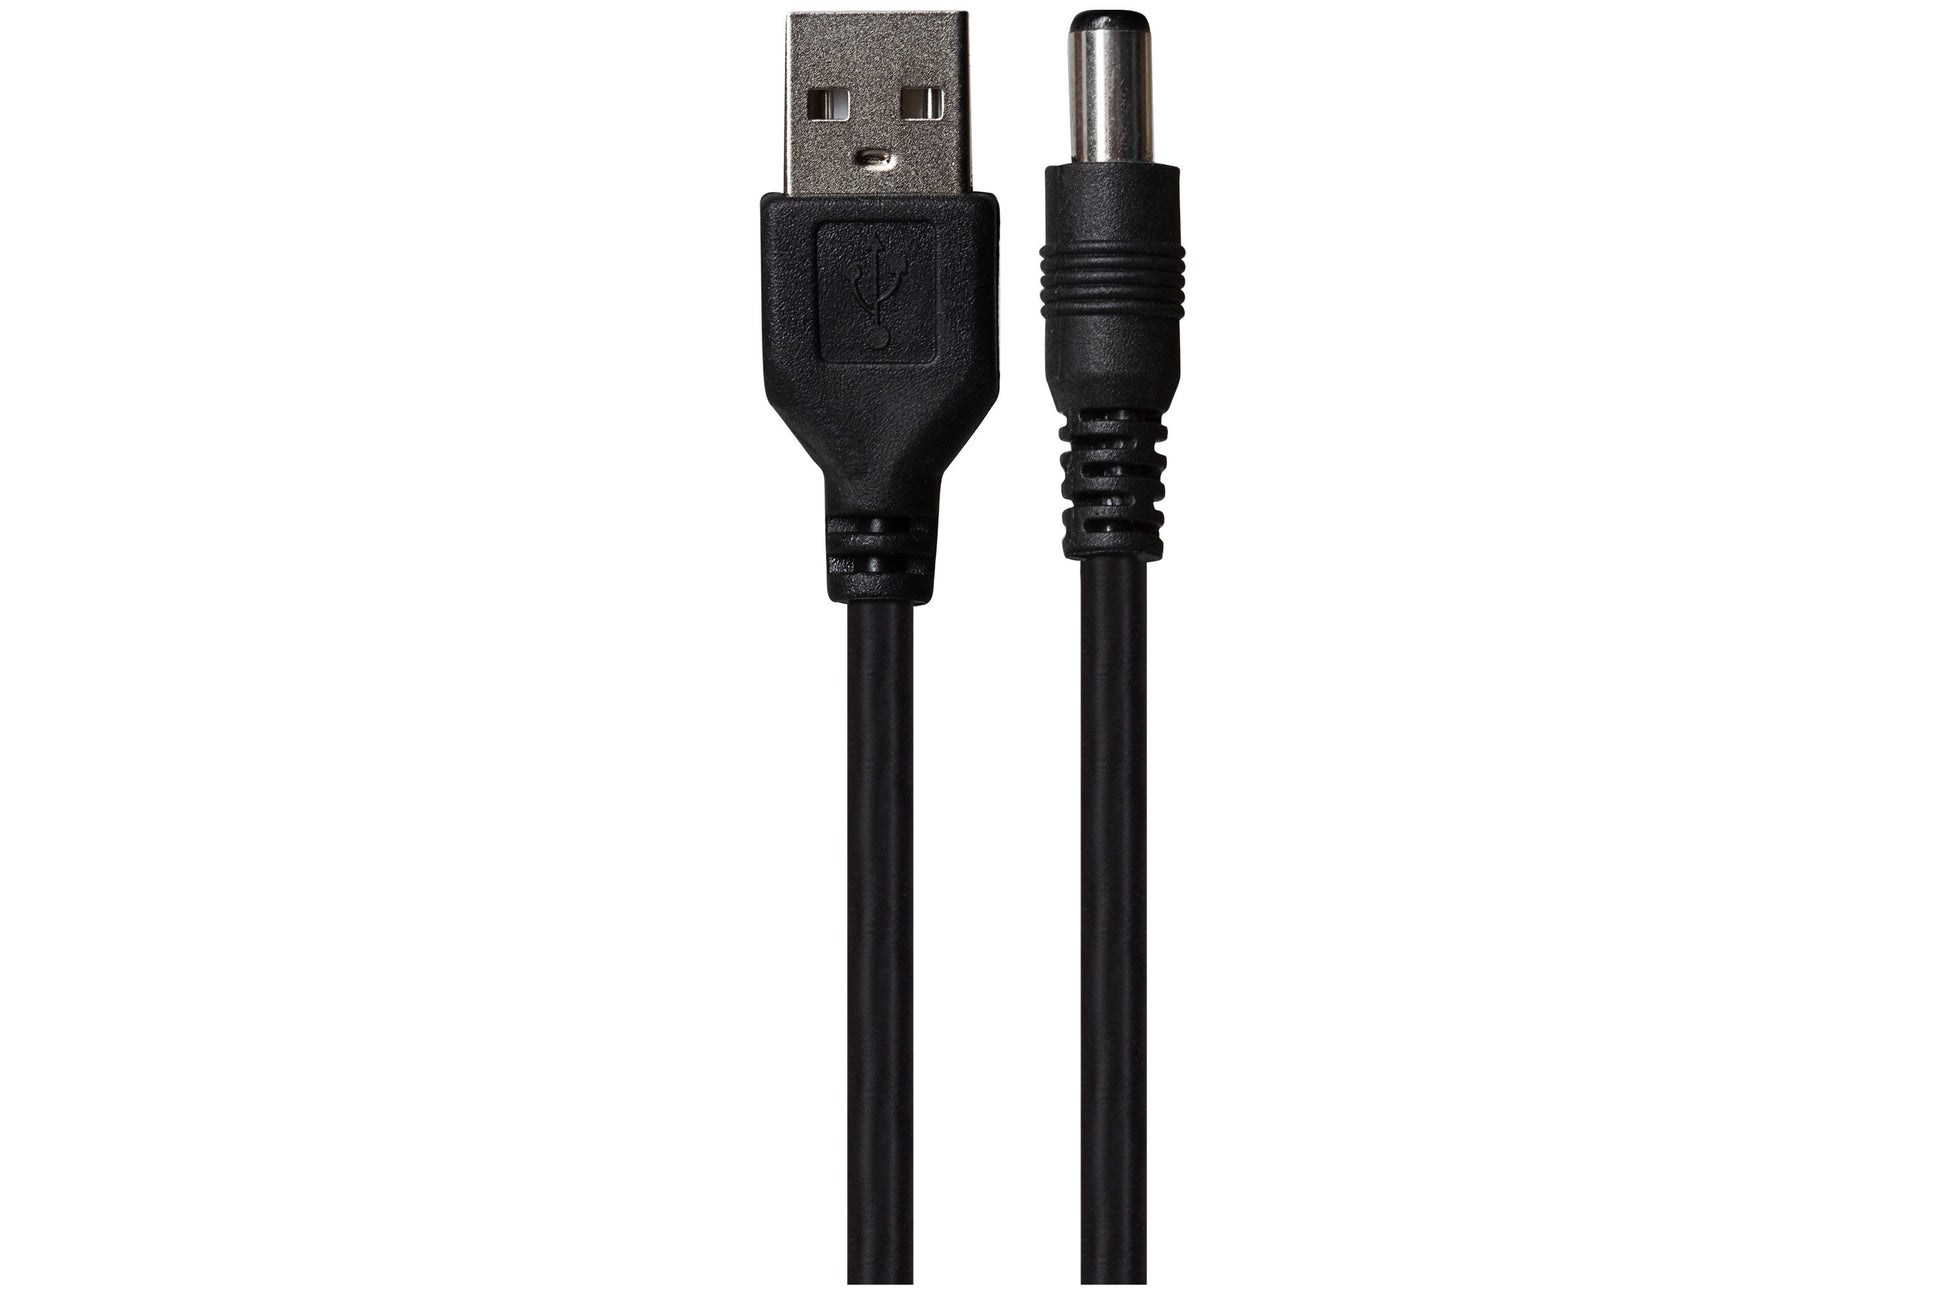 MPS Maplin Power Supply Cable USB-A to 2.1 x 5.5 x 10mm Plug - Black, 1m - maplin.co.uk